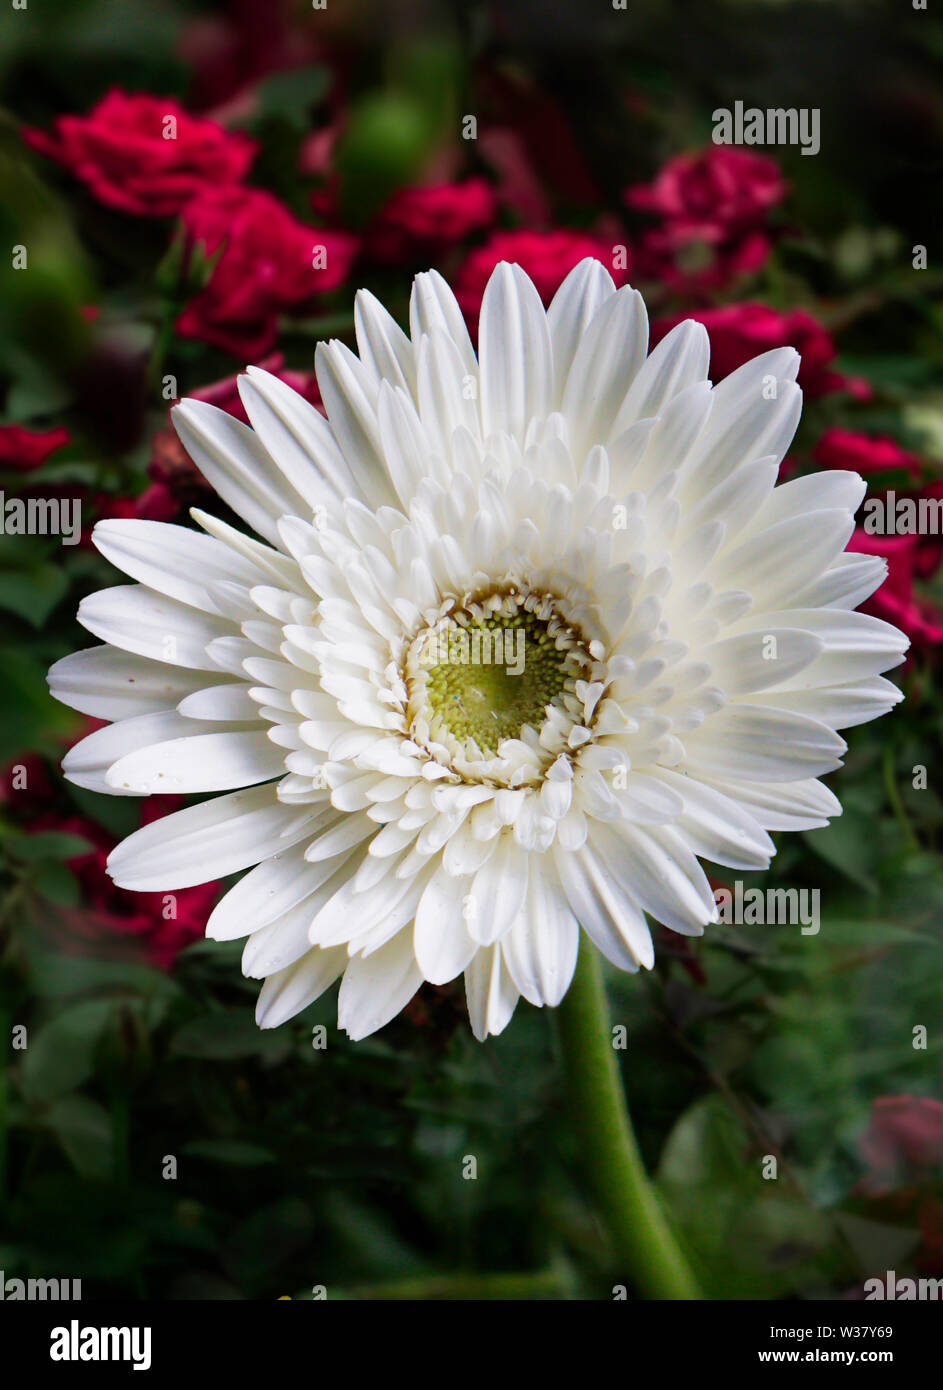 Isolated White Flower HD Image close-up on house garden Stock Photo